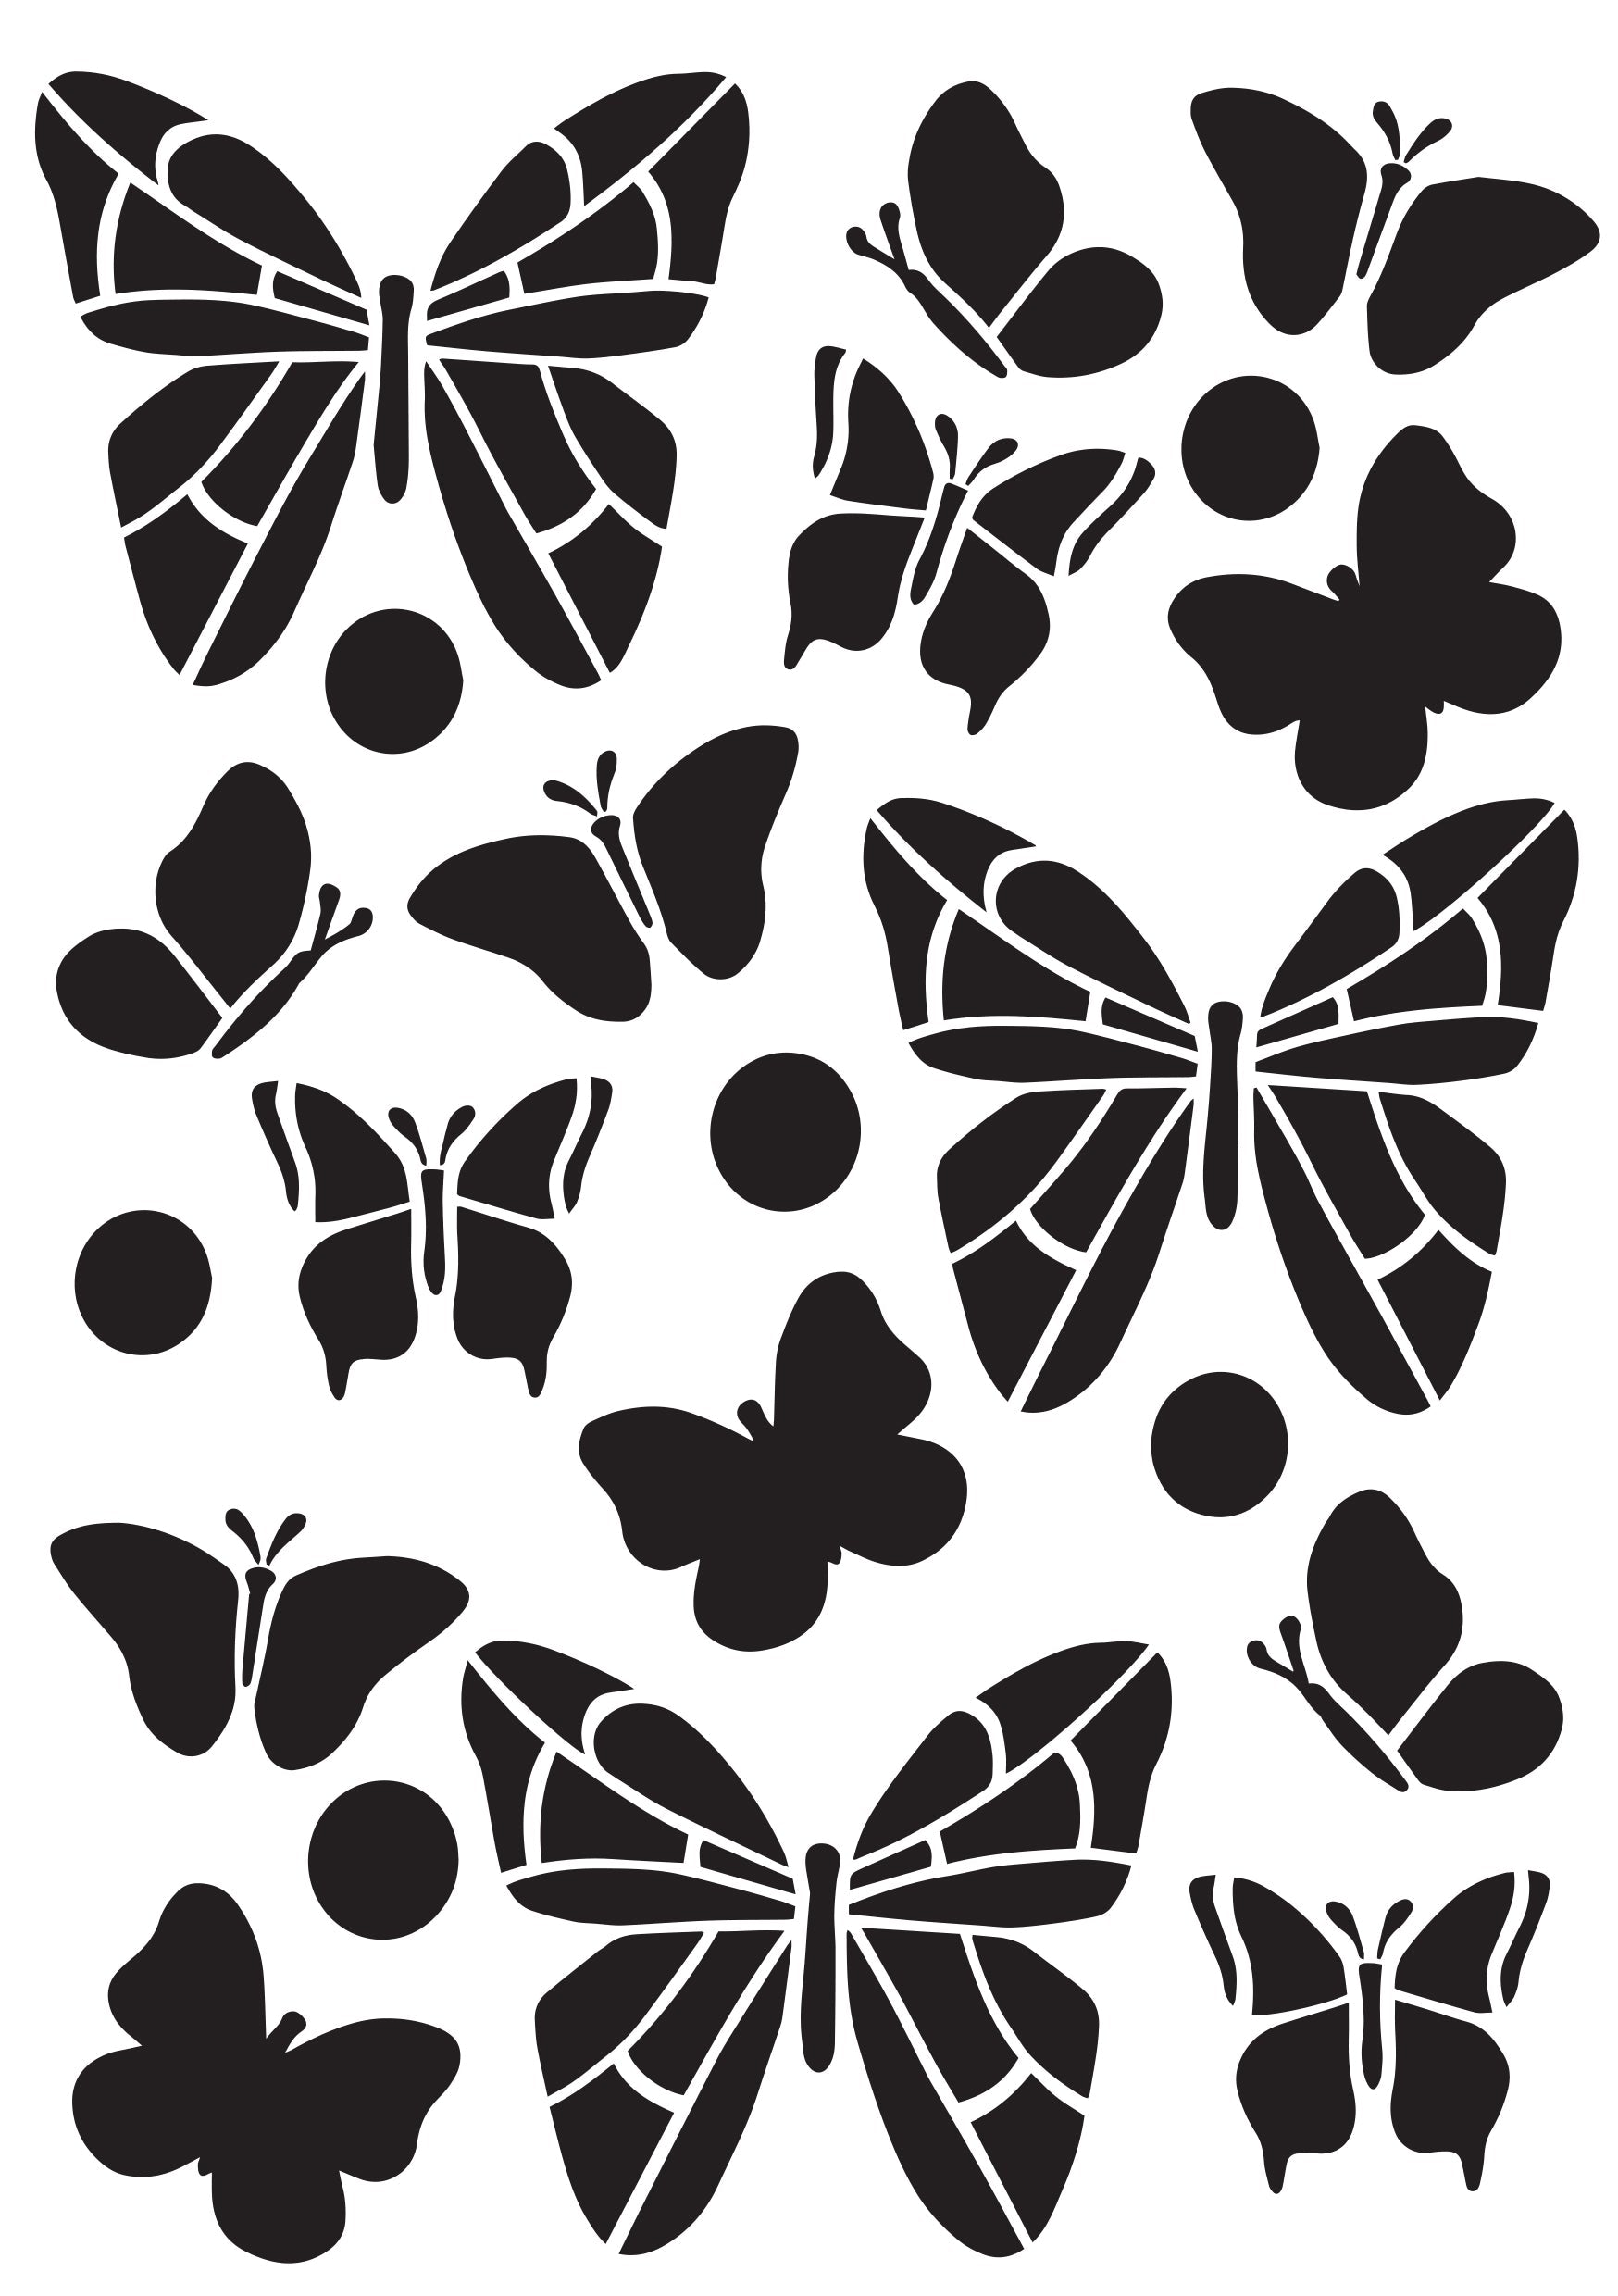 Creative Expressions Helen Colebrook Whimsical Butterflies 8 in x 6 in Stencil